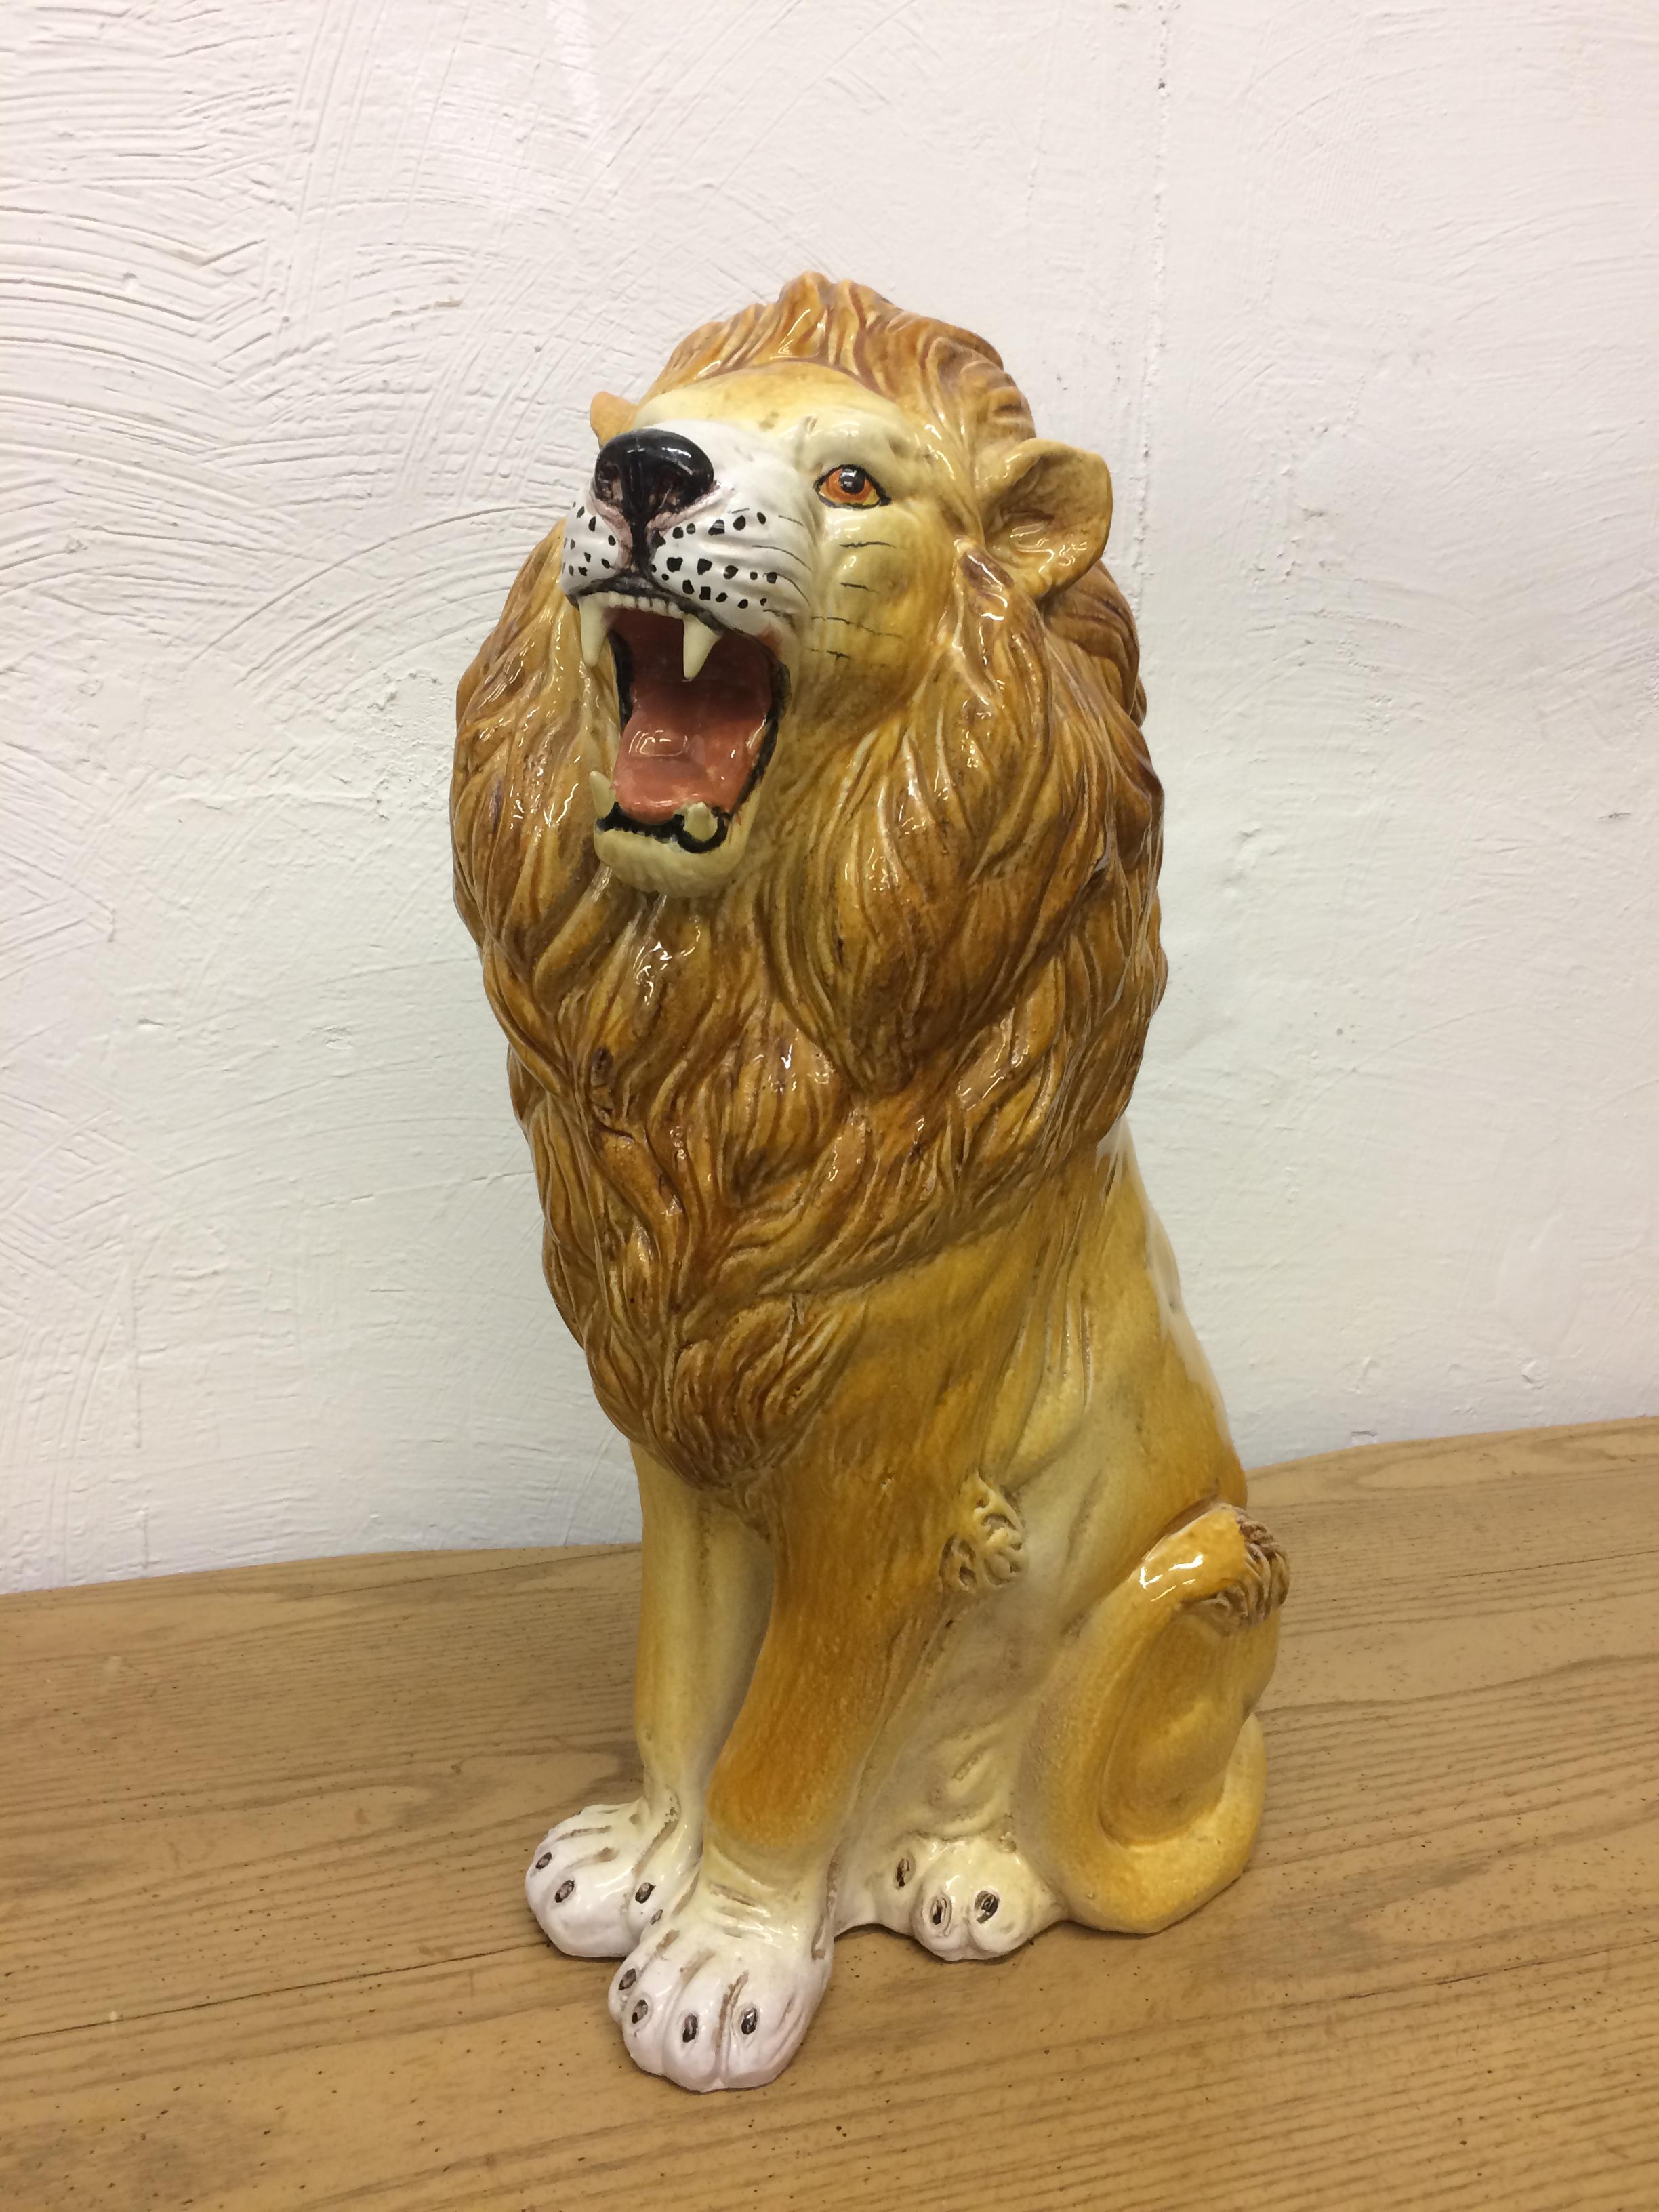 Glazed terra cotta large roaring lion. Marked made in Italy. In very good condition with no damage.
Measures: 26 inches high by 15 wide by 9 inches deep.